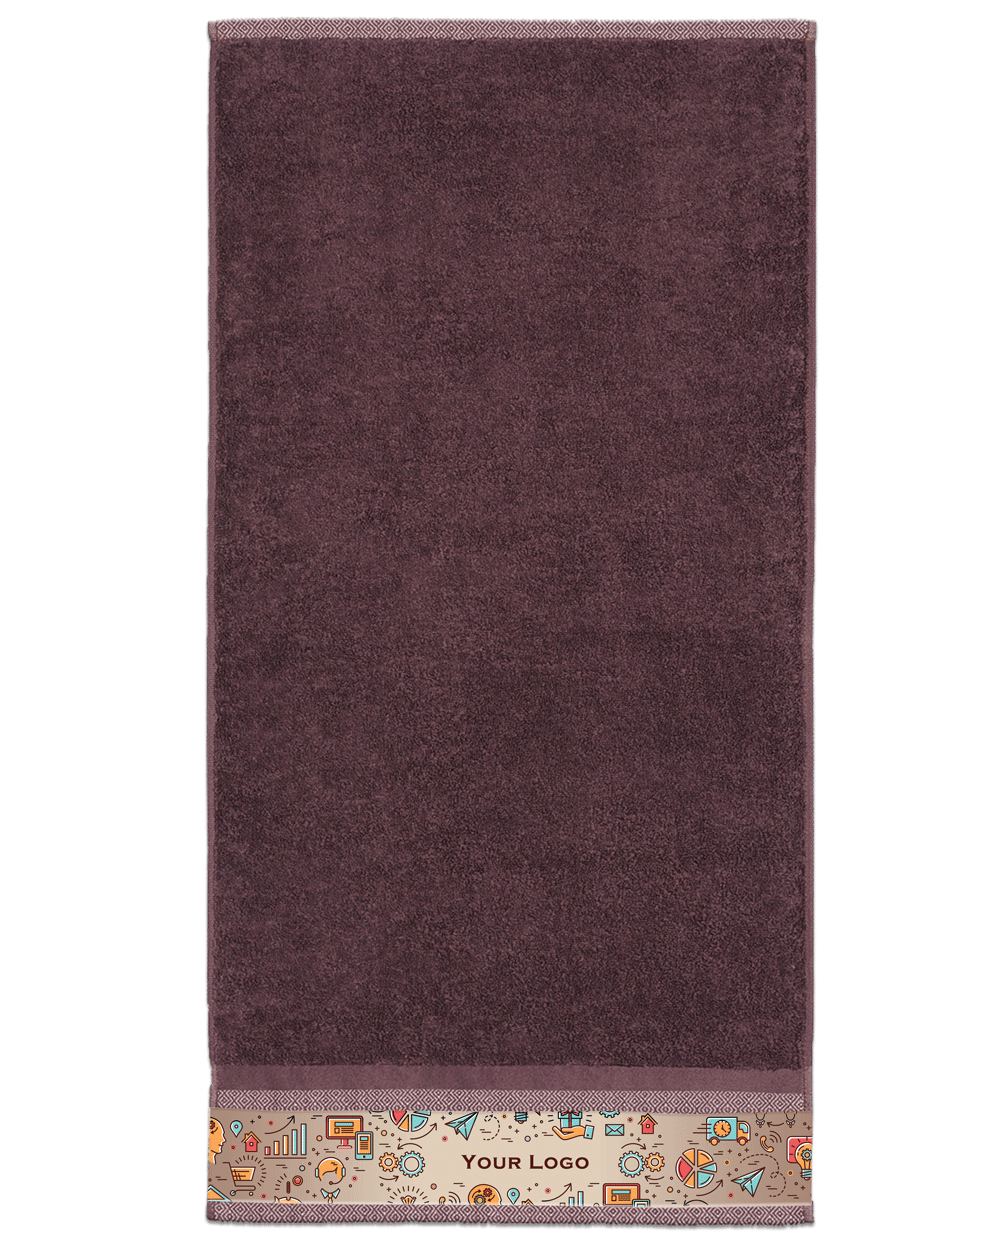 Conference Brown Hand Towel (SIZE 16"X 32")